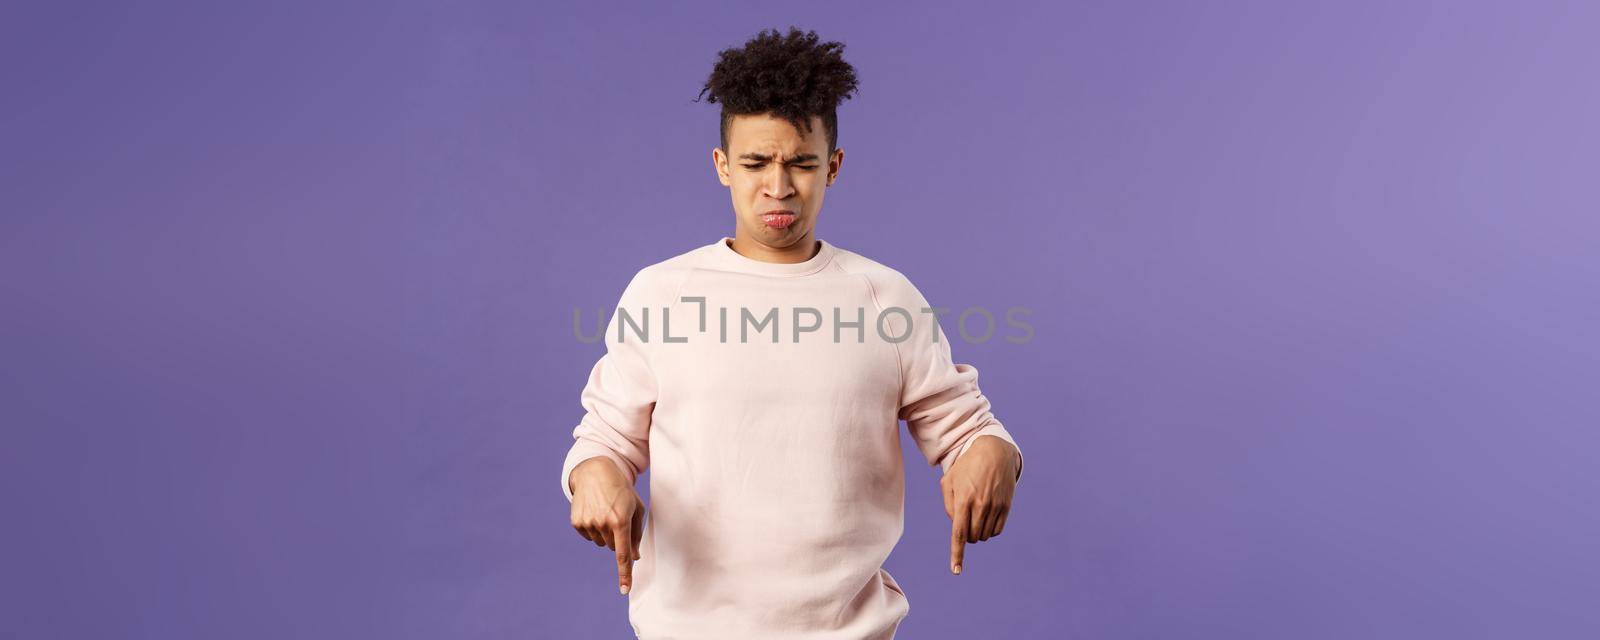 Portrait of gloomy and silly disappointed whining guy, sobbing and crying from envy or jealousy, regret missing chance, looking and pointing down with upset unhappy expression, purple background.